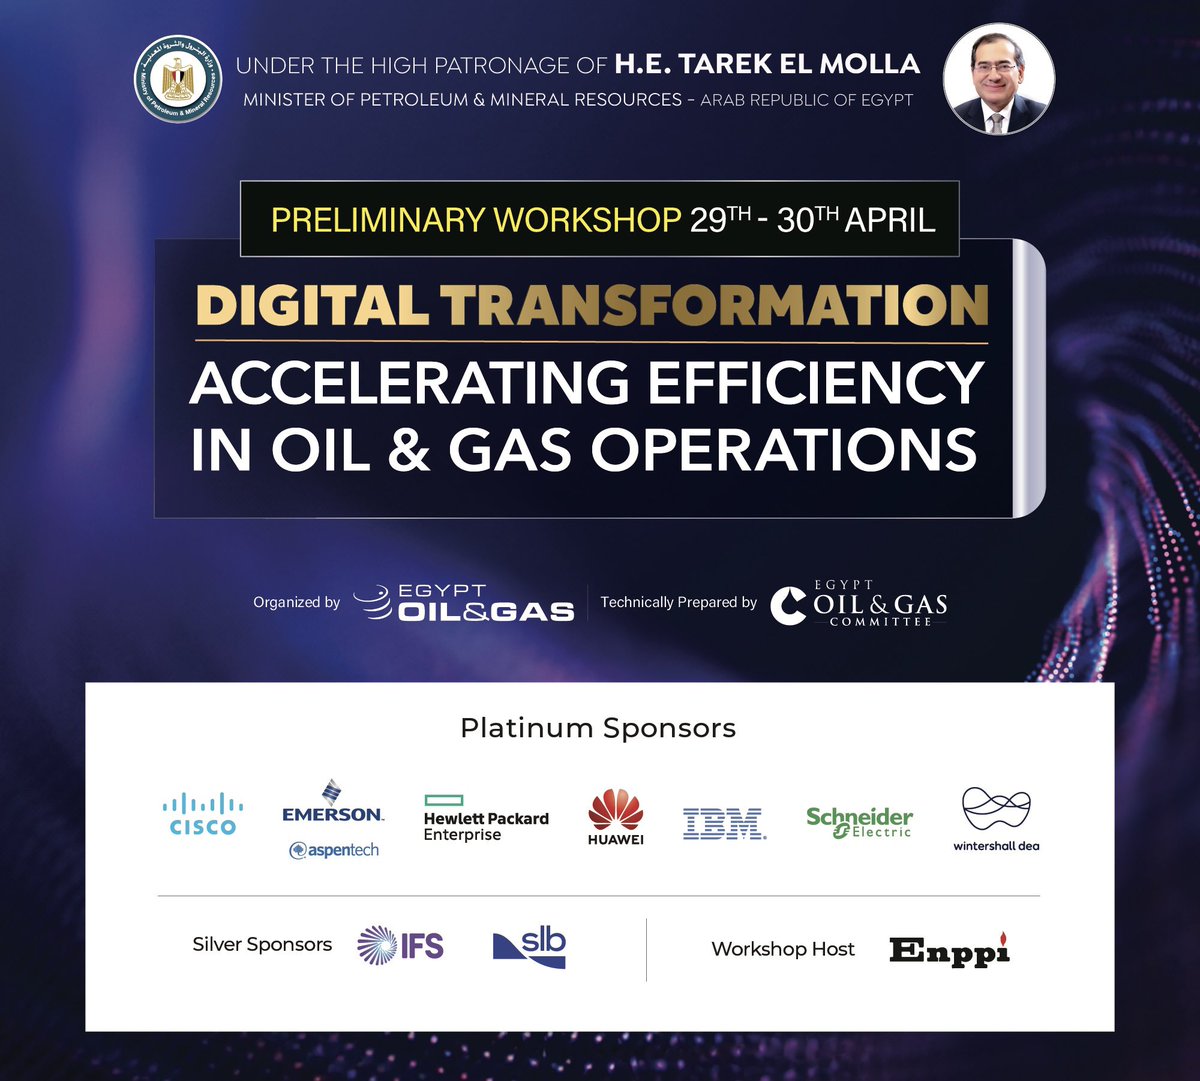 Our preliminary workshop for the Digitalization Event “ Digital Transformation accelerating efficiency in Oil & Gas operations” starts tomorrow. Stay tuned for insights, inspiration, and the first steps towards a future of innovation. #Digitalization #Techworkshop